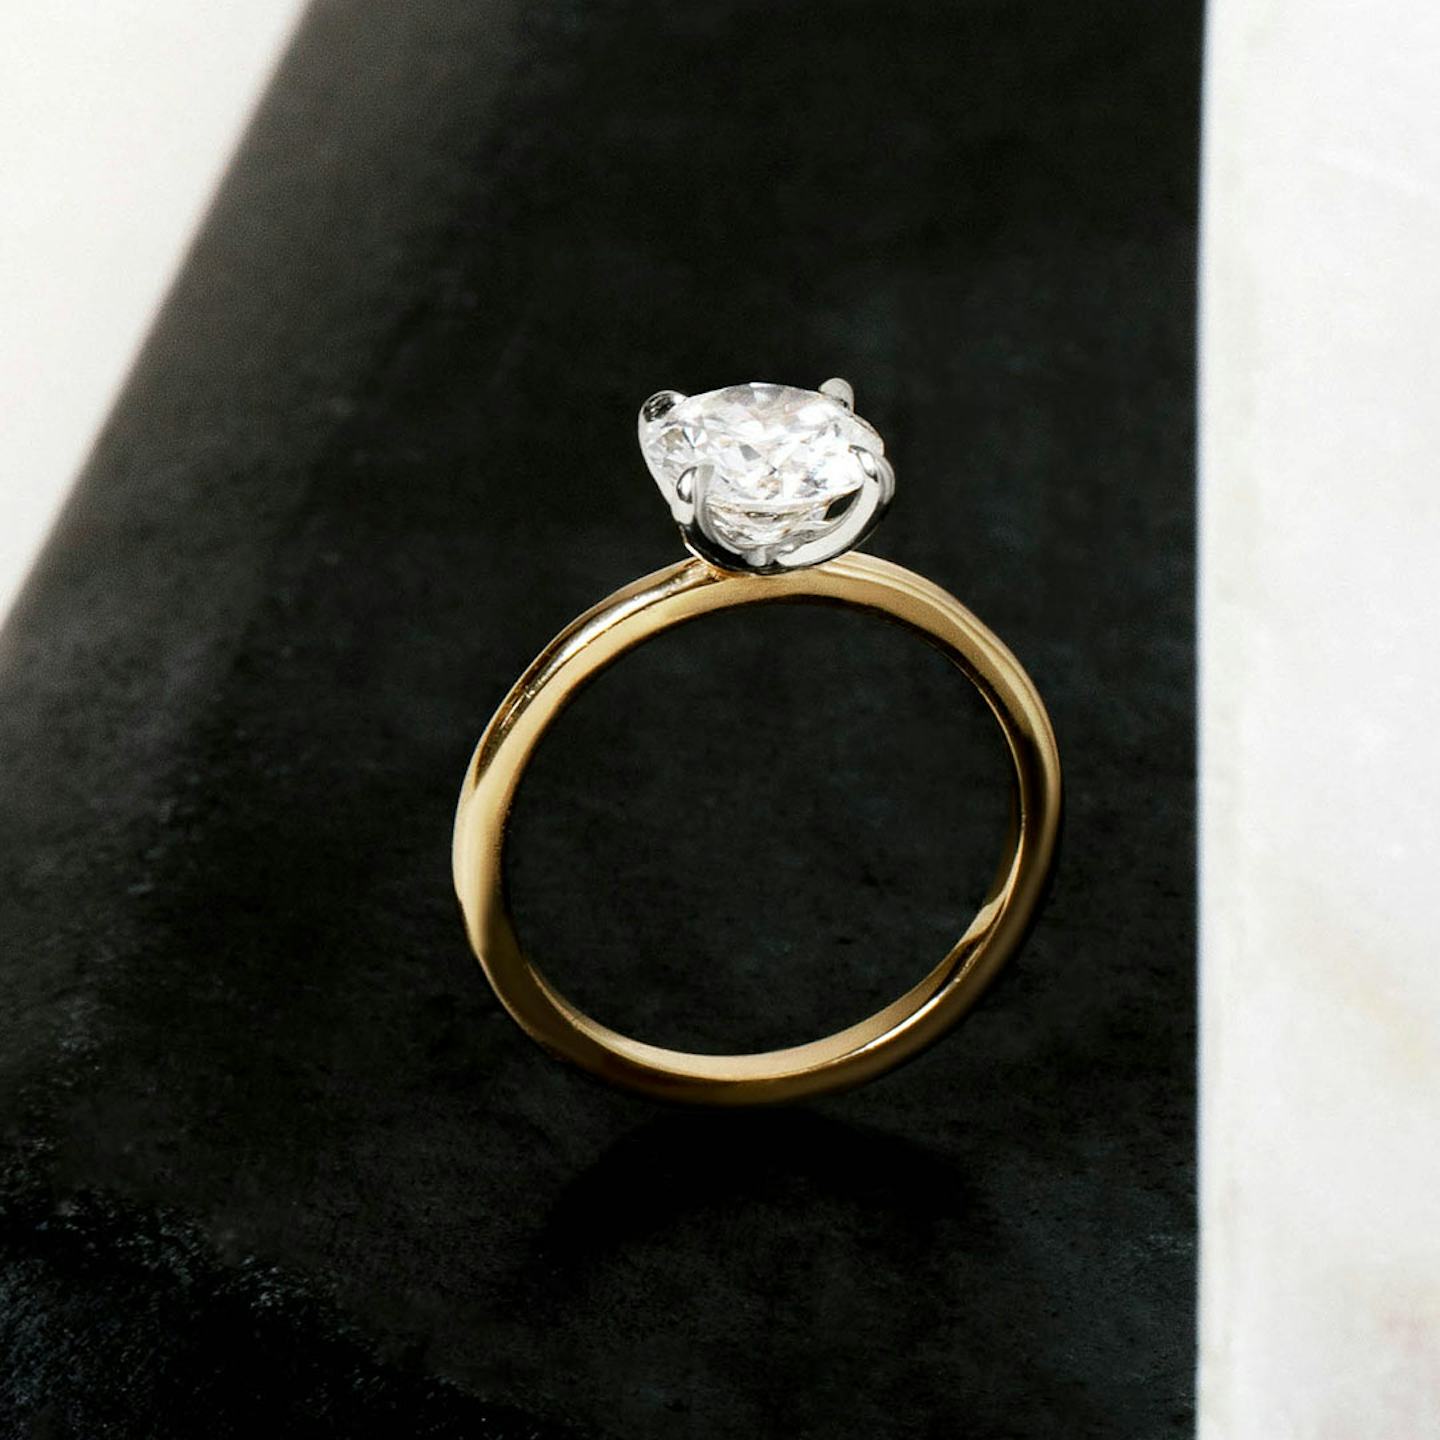 The Classic Two Tone | Round Brilliant | 18k | 18k Yellow Gold | Band: Plain | Carat weight: 1 | Diamond orientation: vertical